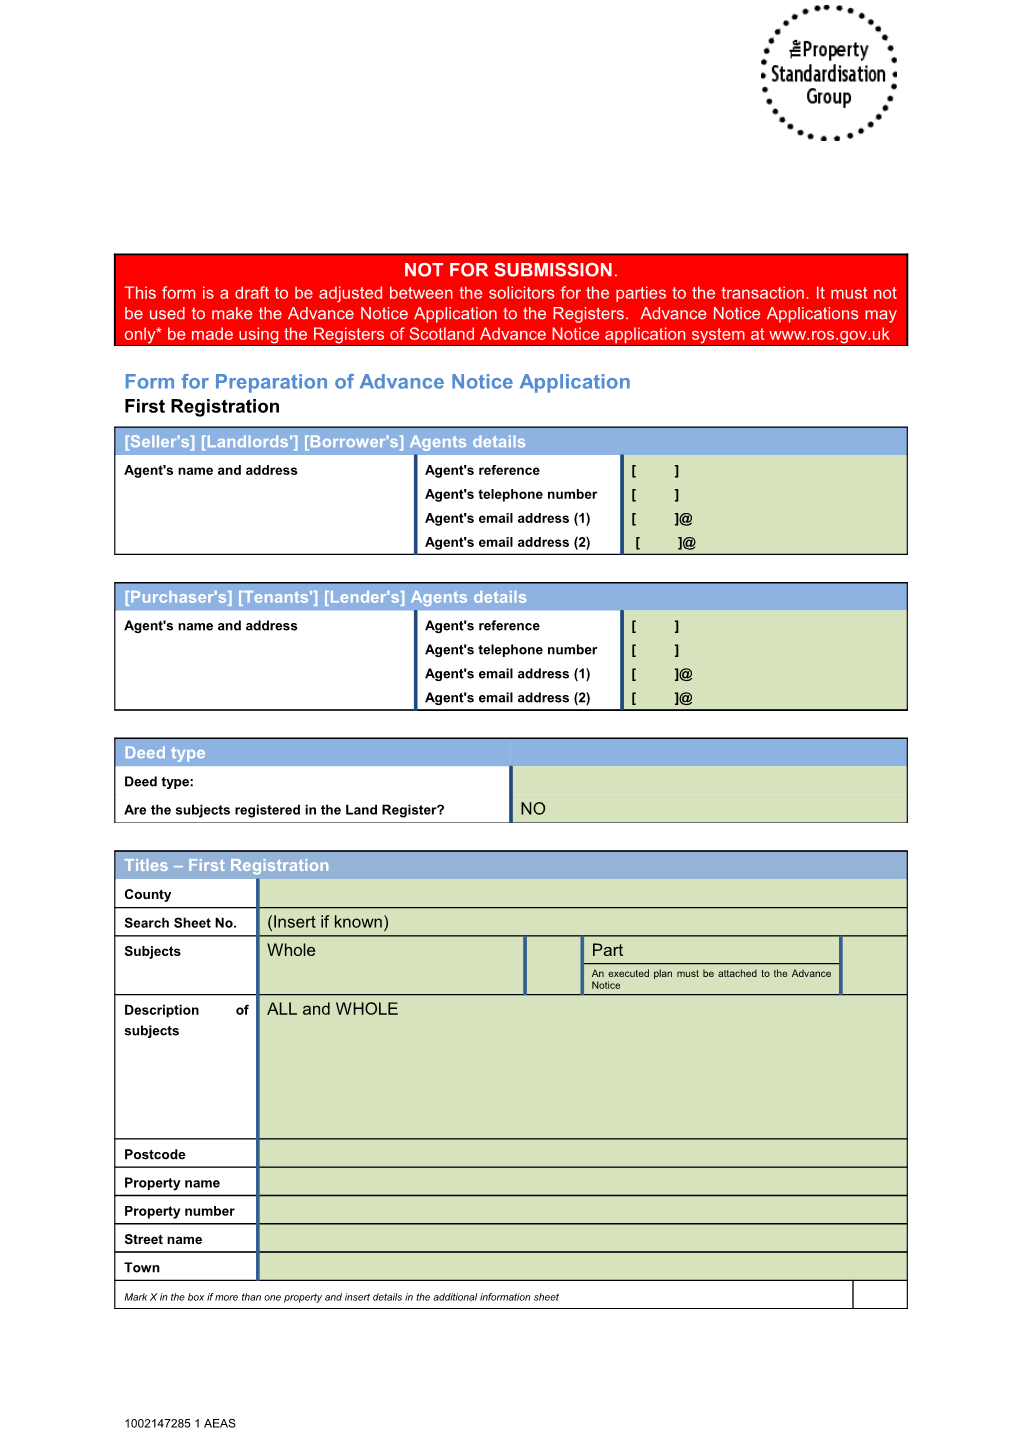 Form for Preparation of Advance Notice Application